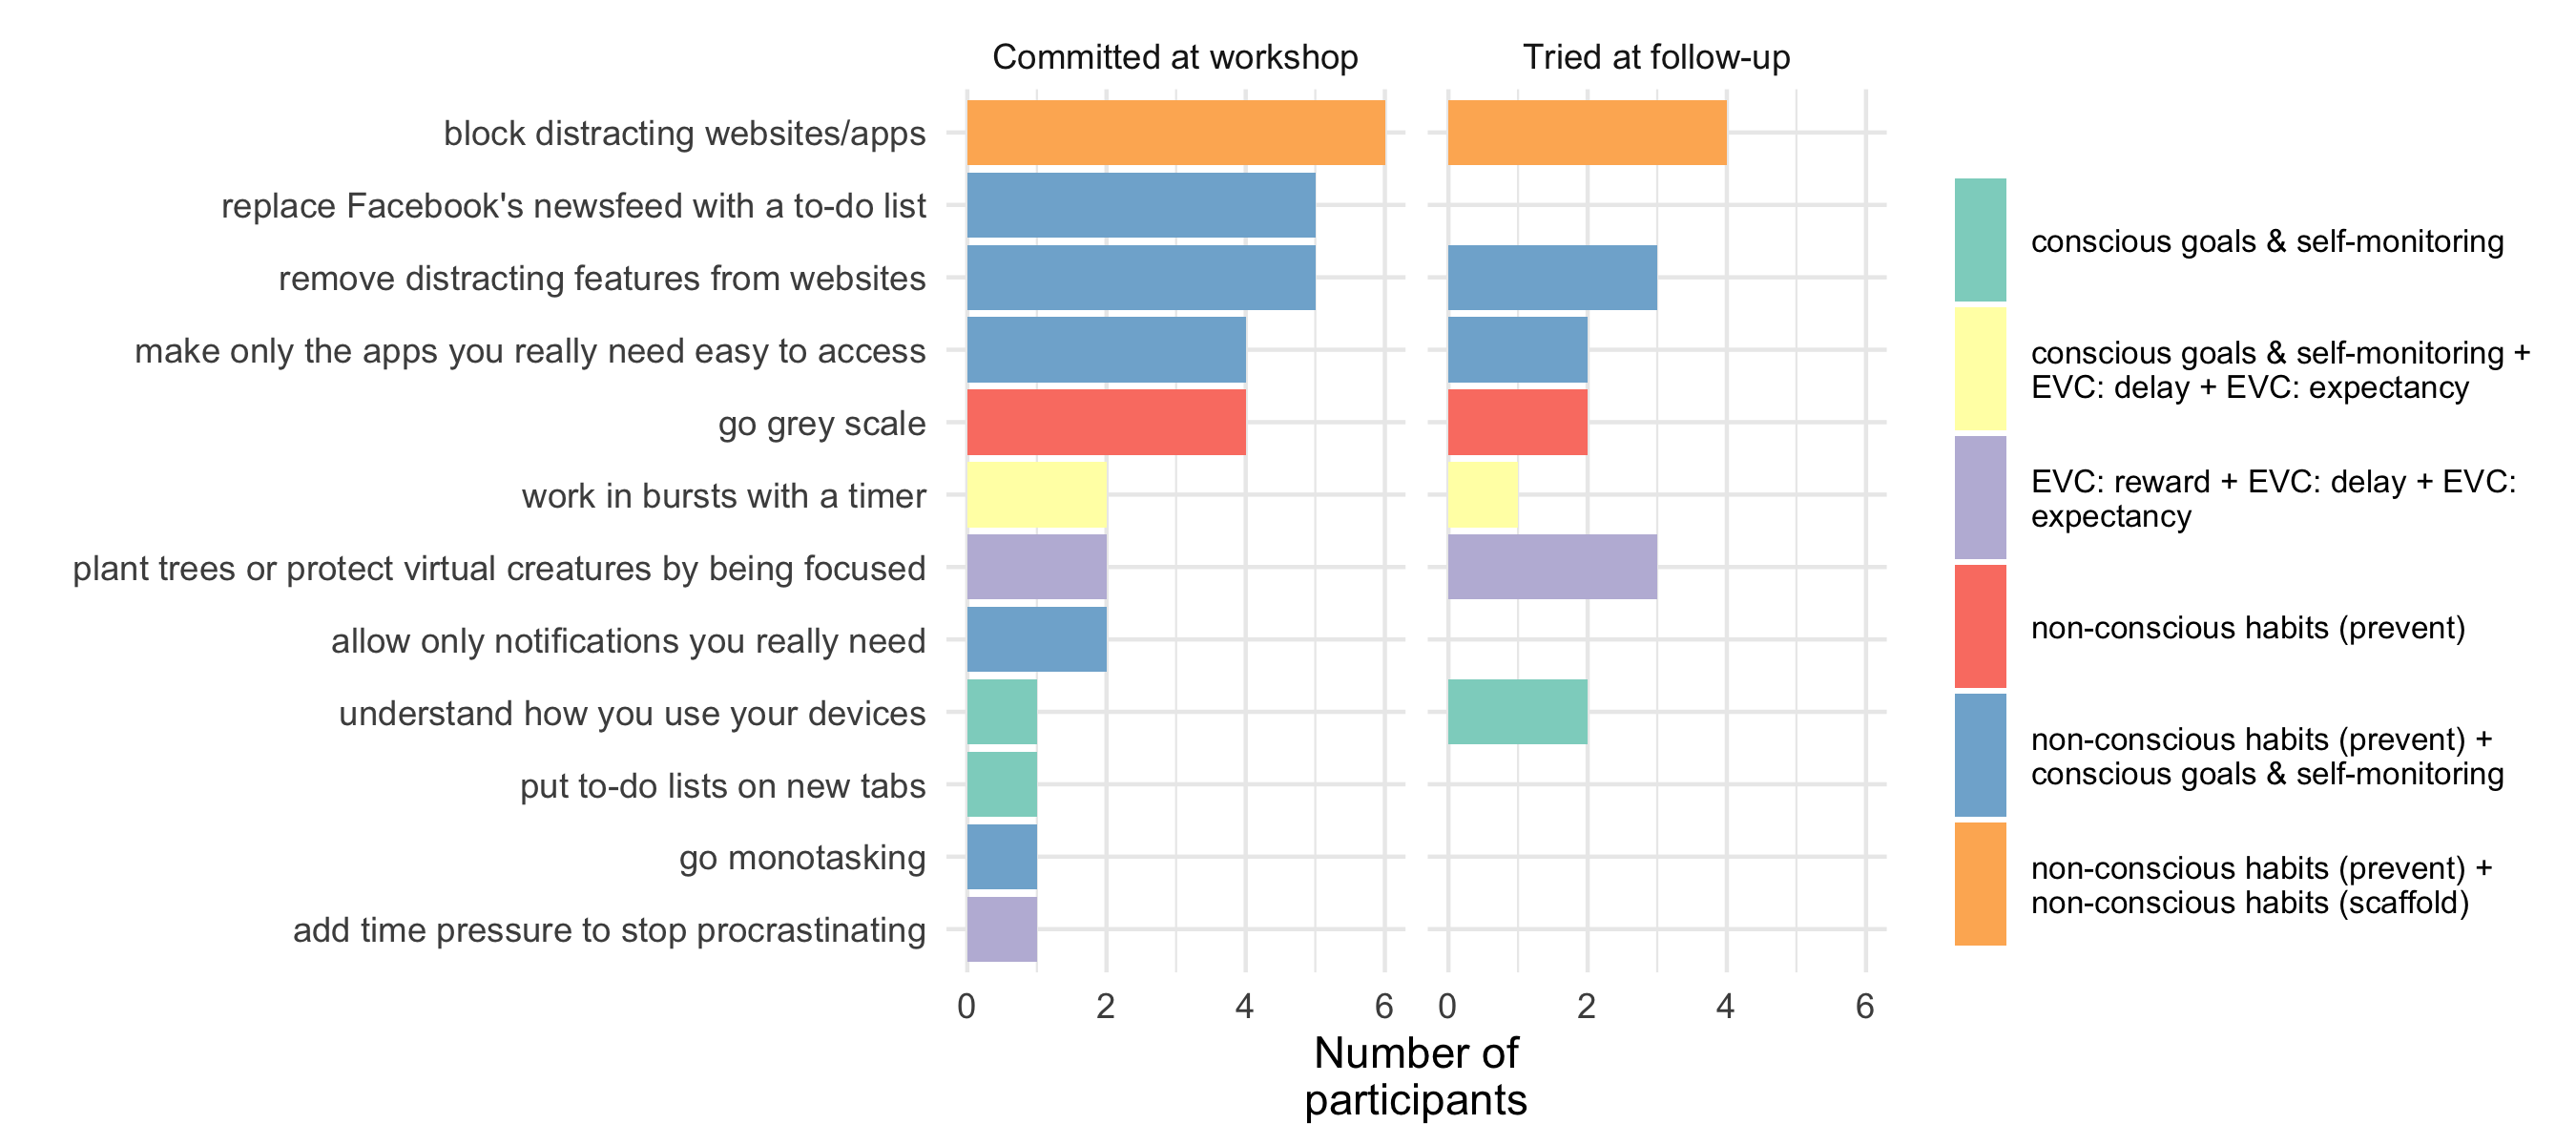 The interventions that participants committed to trying out in the workshop, and which ones respondents at the two-month follow-up had actually tried. Fill colour show intervention mapping to dual systems theory.